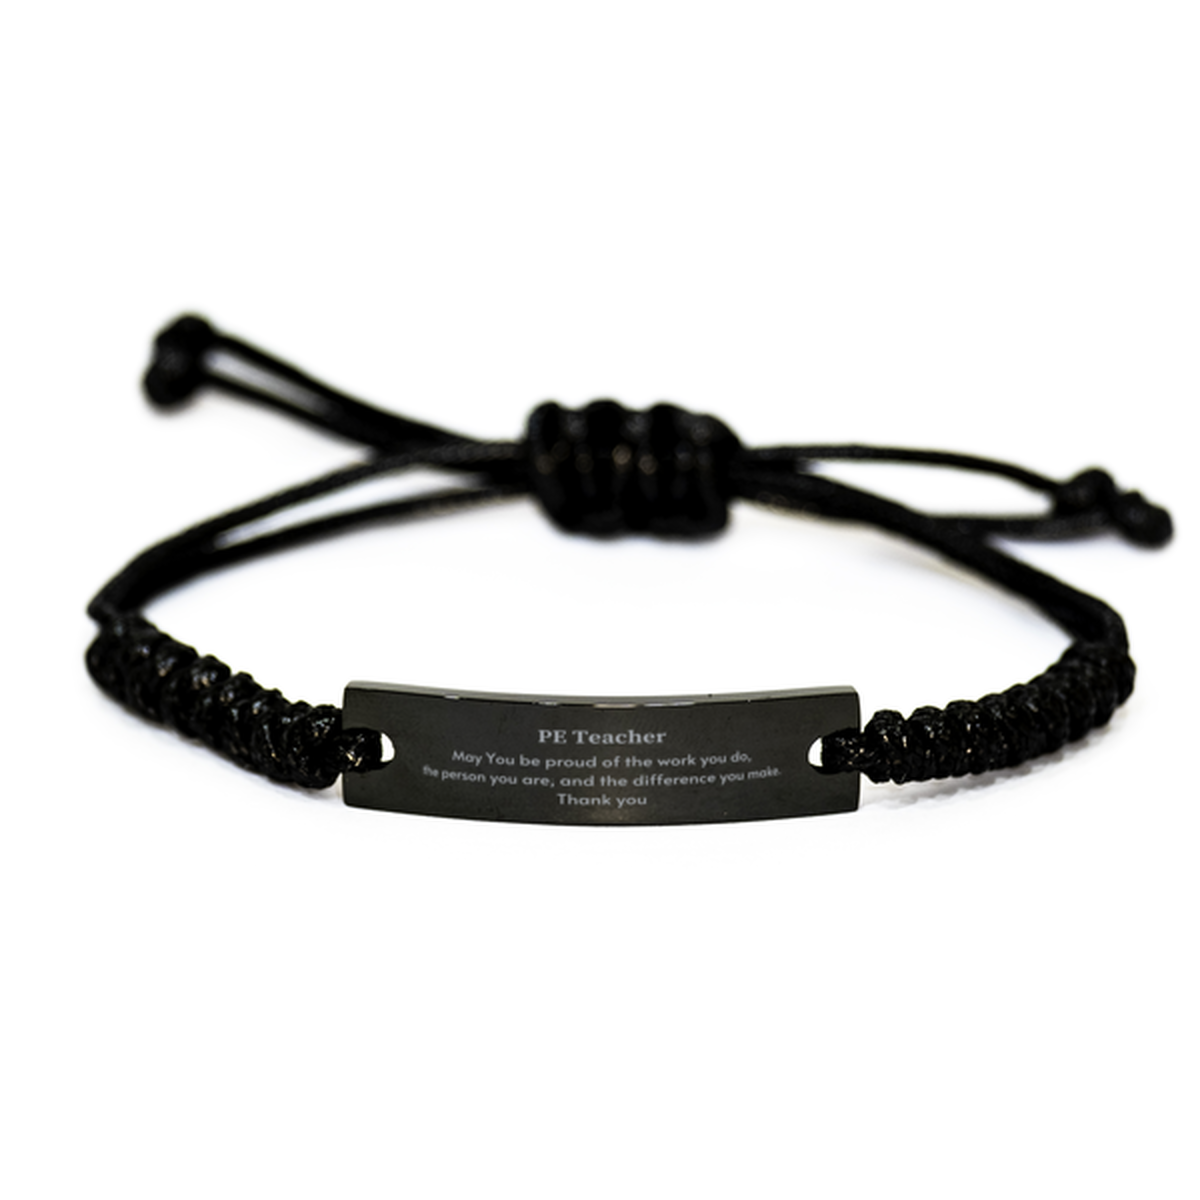 Heartwarming Black Rope Bracelet Retirement Coworkers Gifts for PE Teacher, PE Teacher May You be proud of the work you do, the person you are Gifts for Boss Men Women Friends